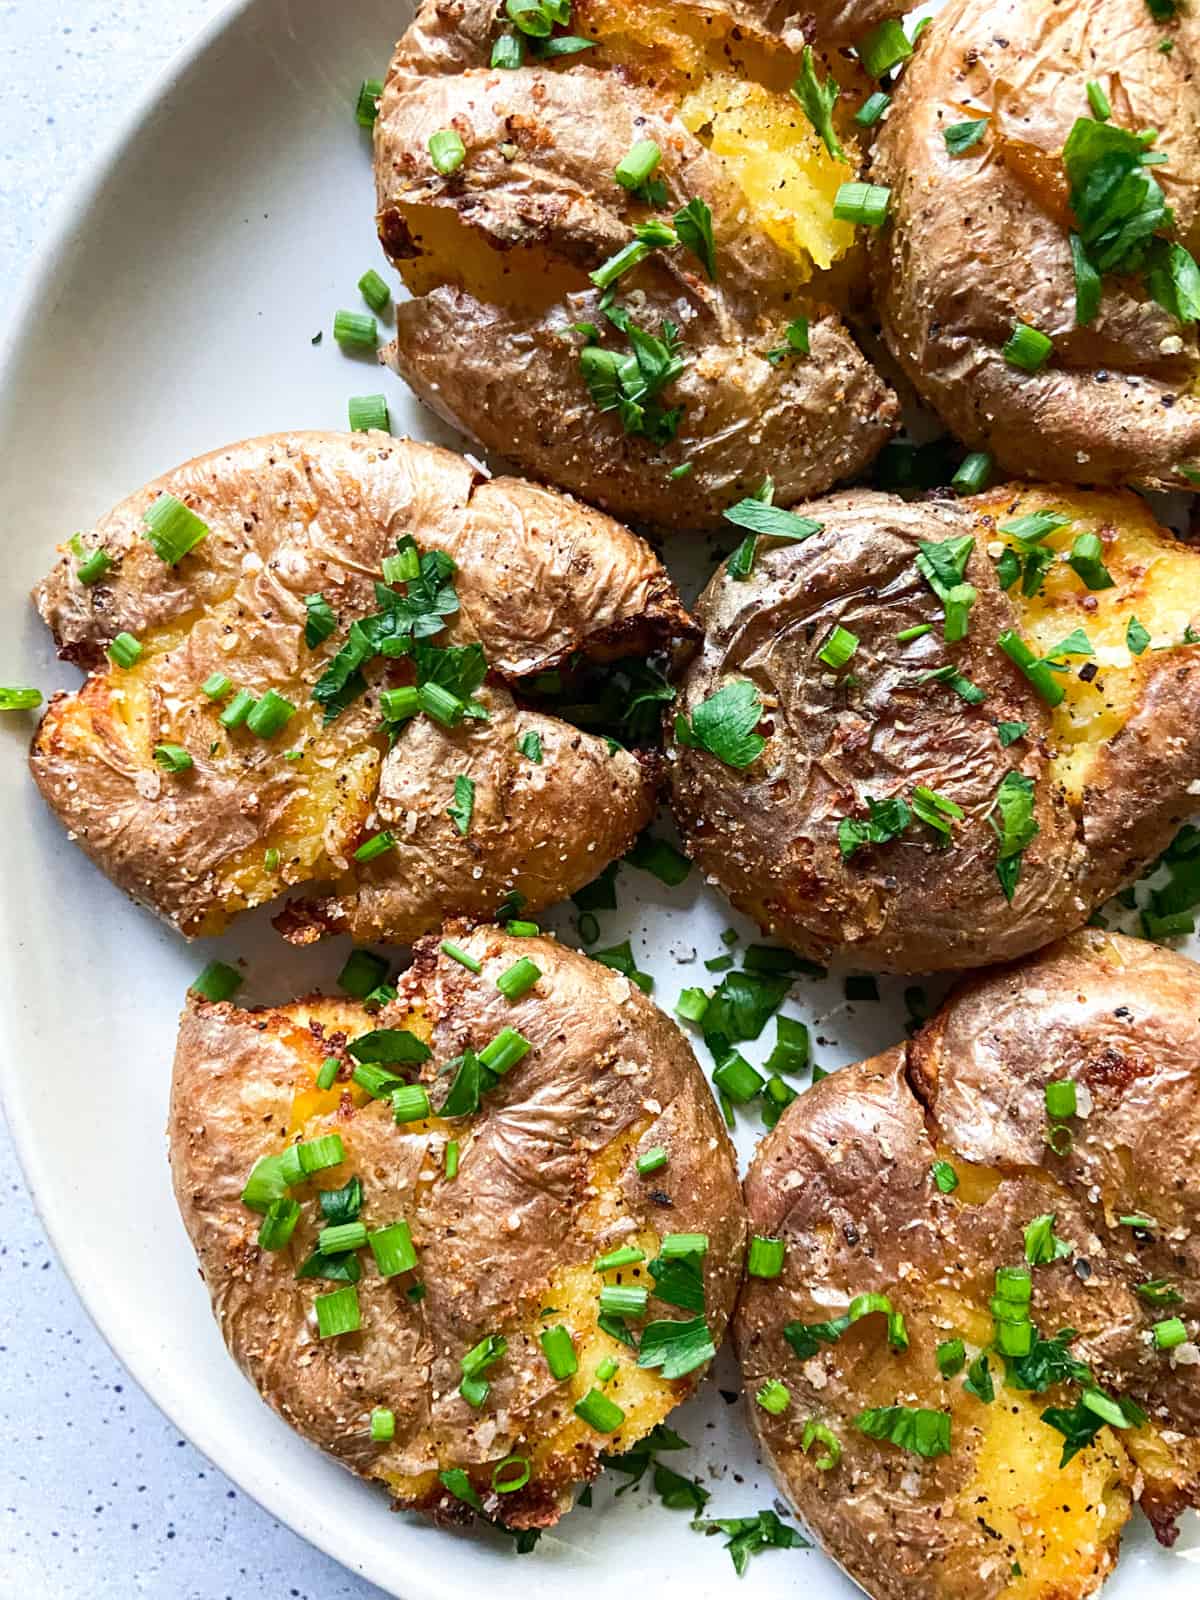 Smashed potatoes garnished with chives.